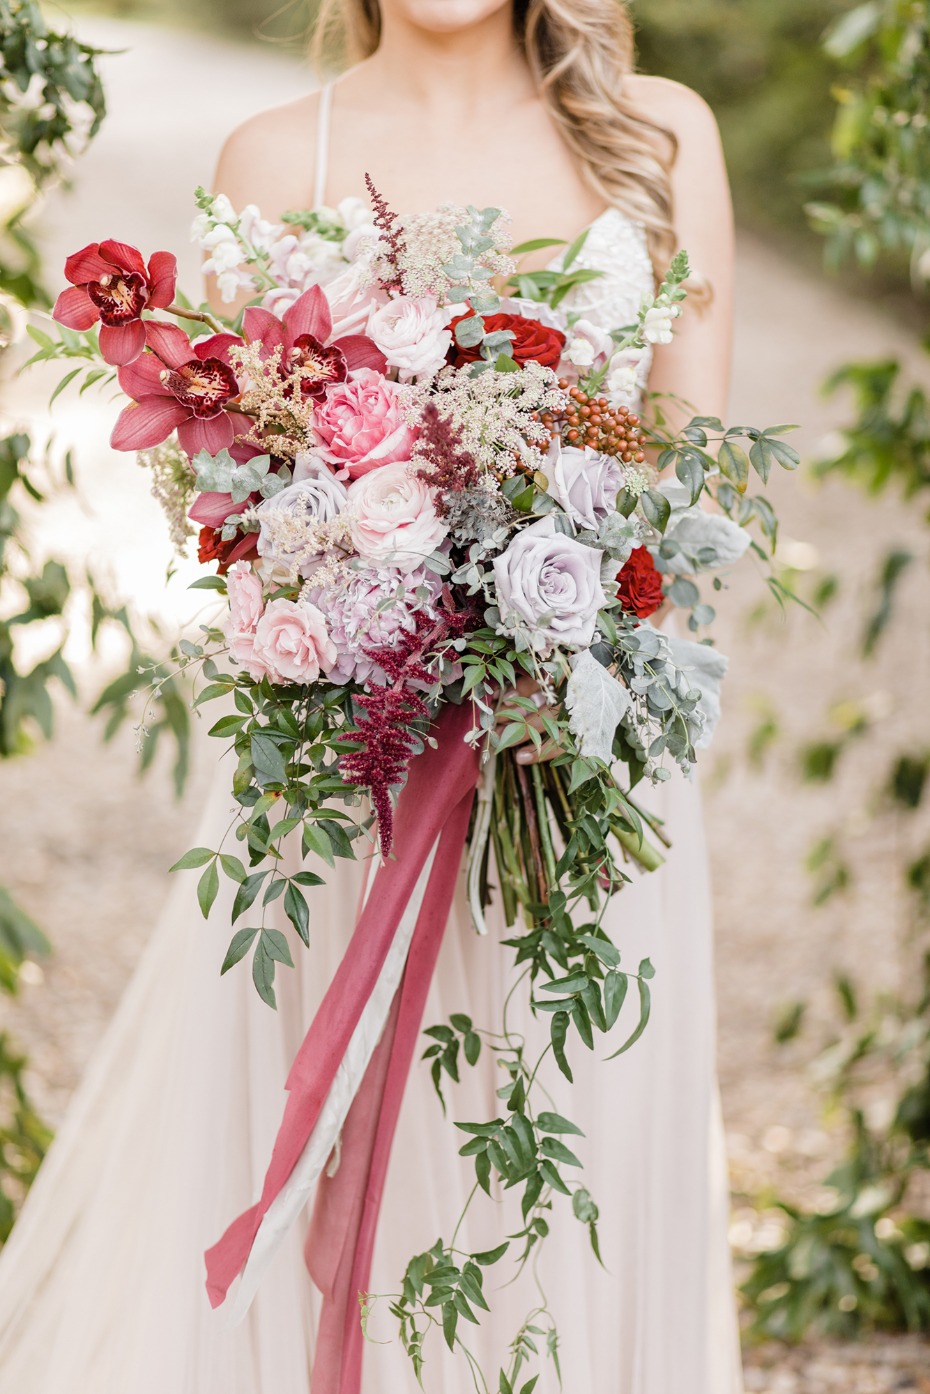 WOWZA! this bouquet is STUNNING